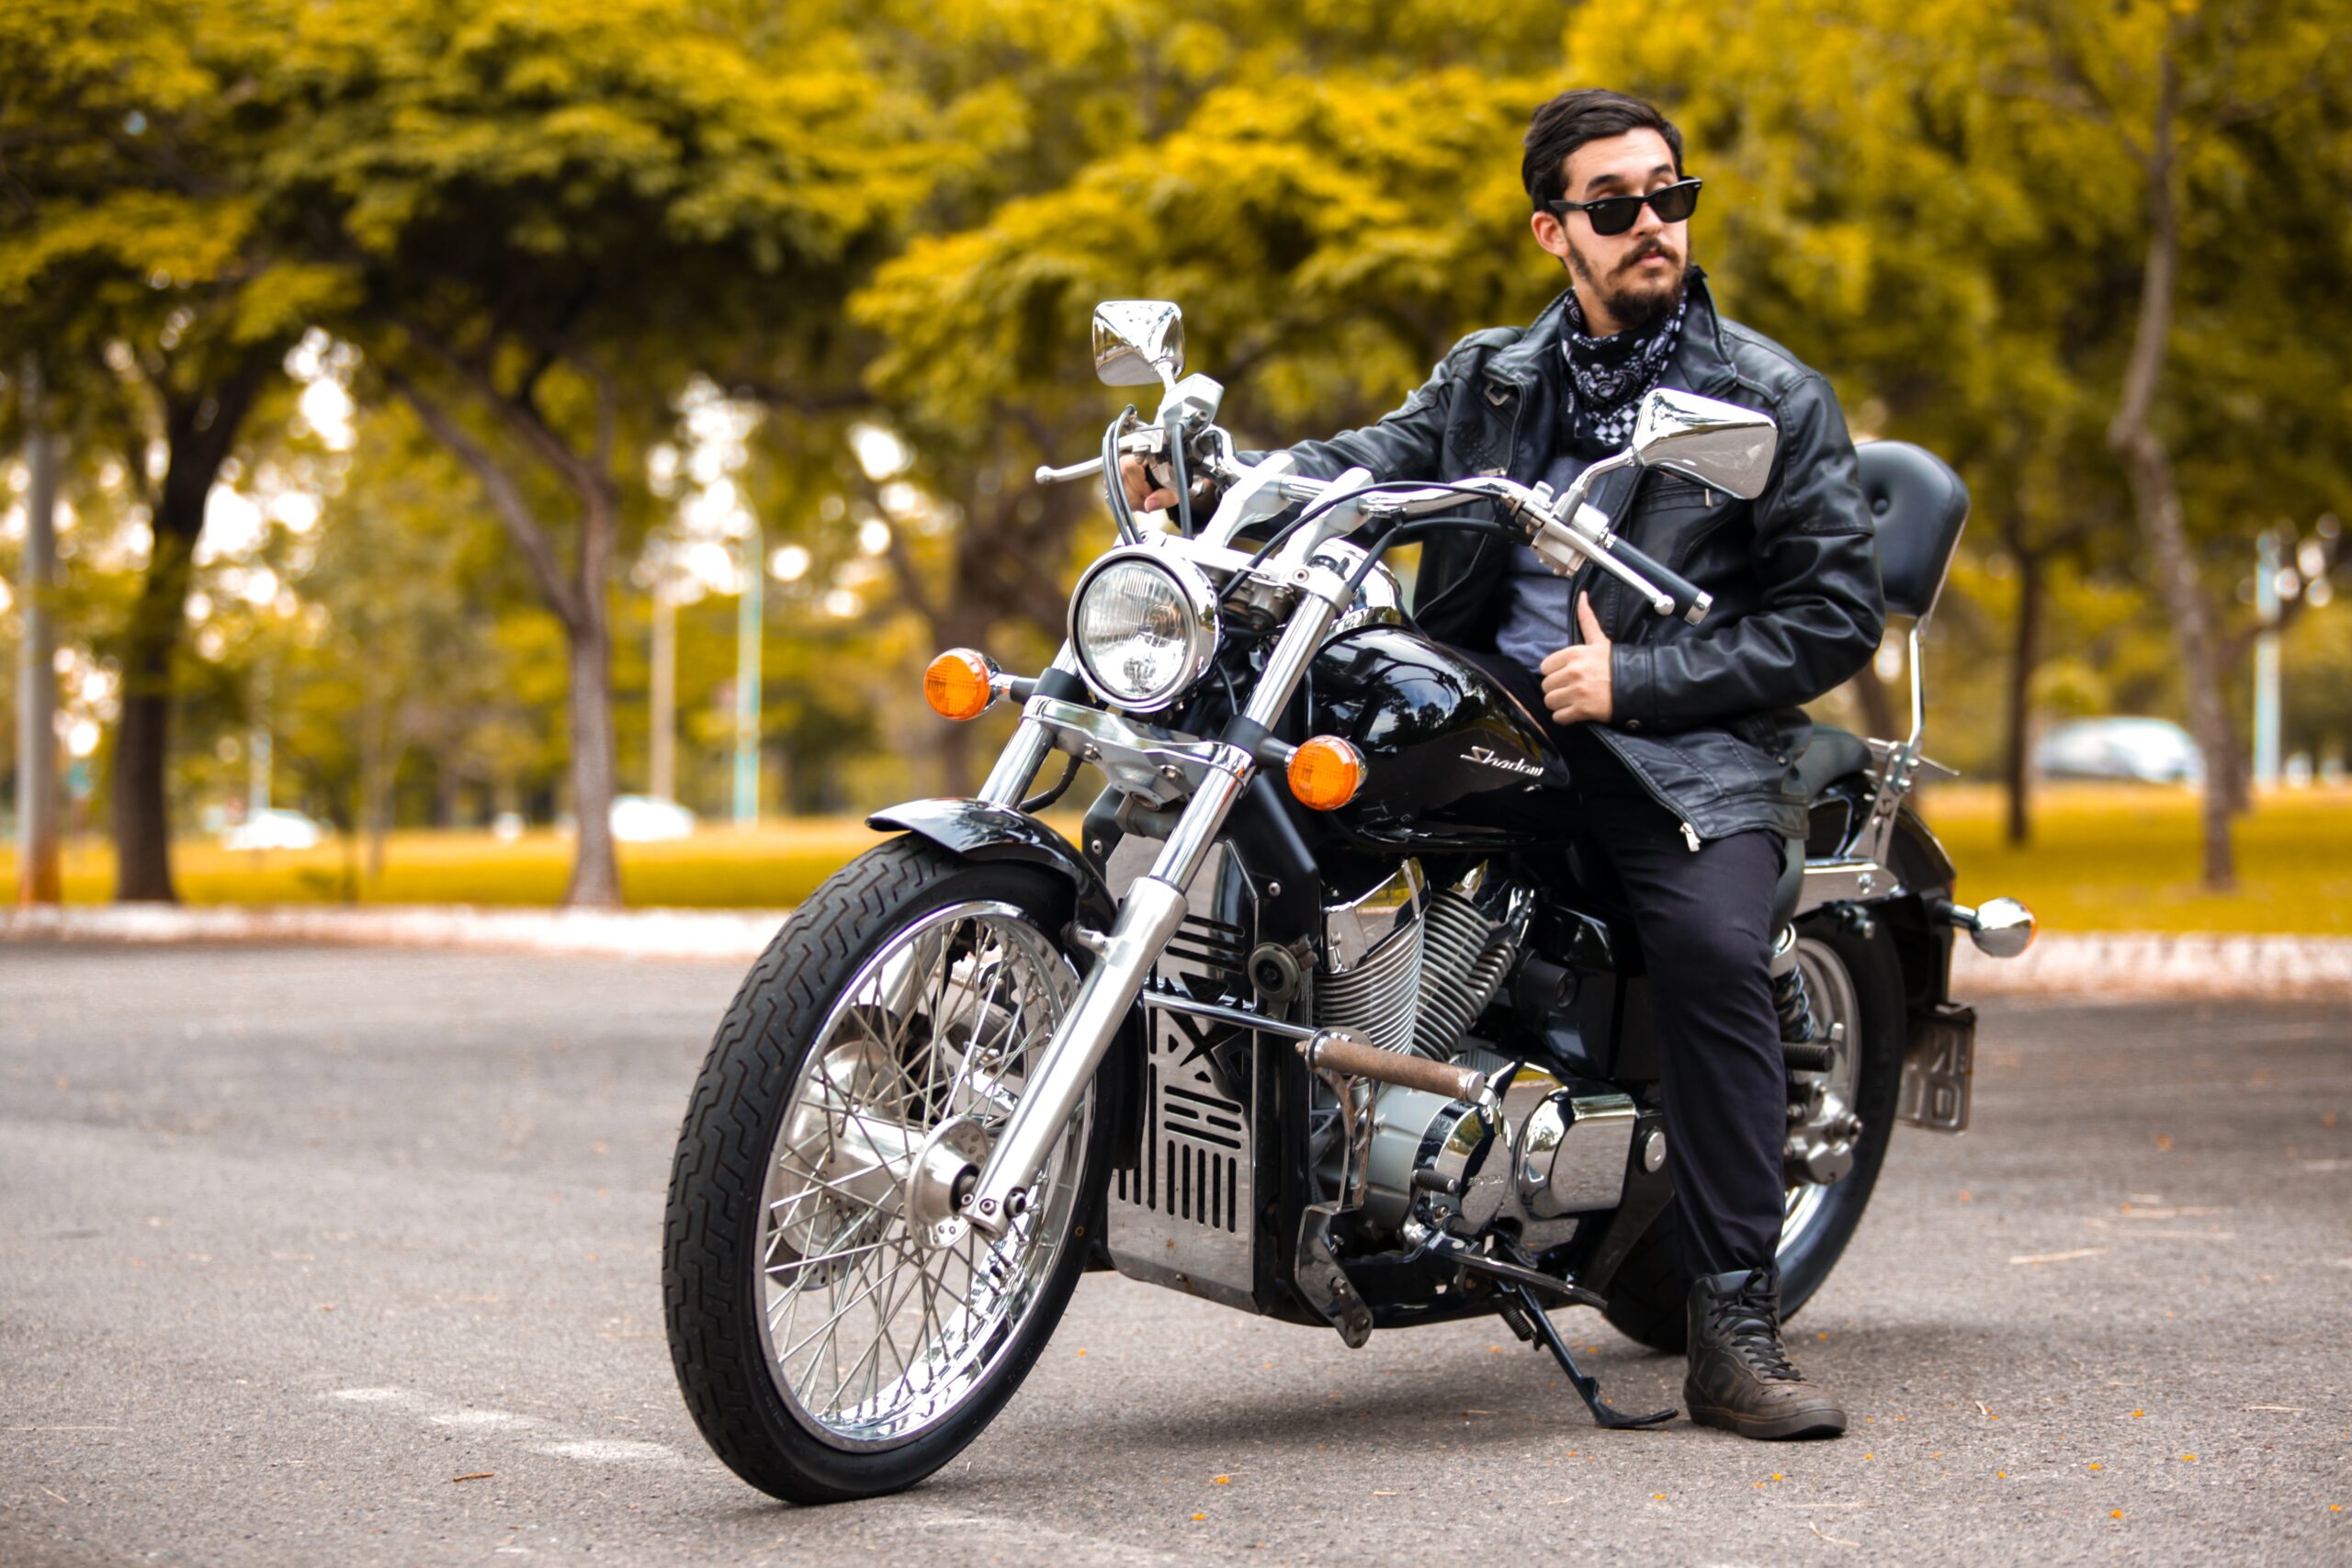 How to Prepare for Fall Riding on Your Luxury Motorcycle